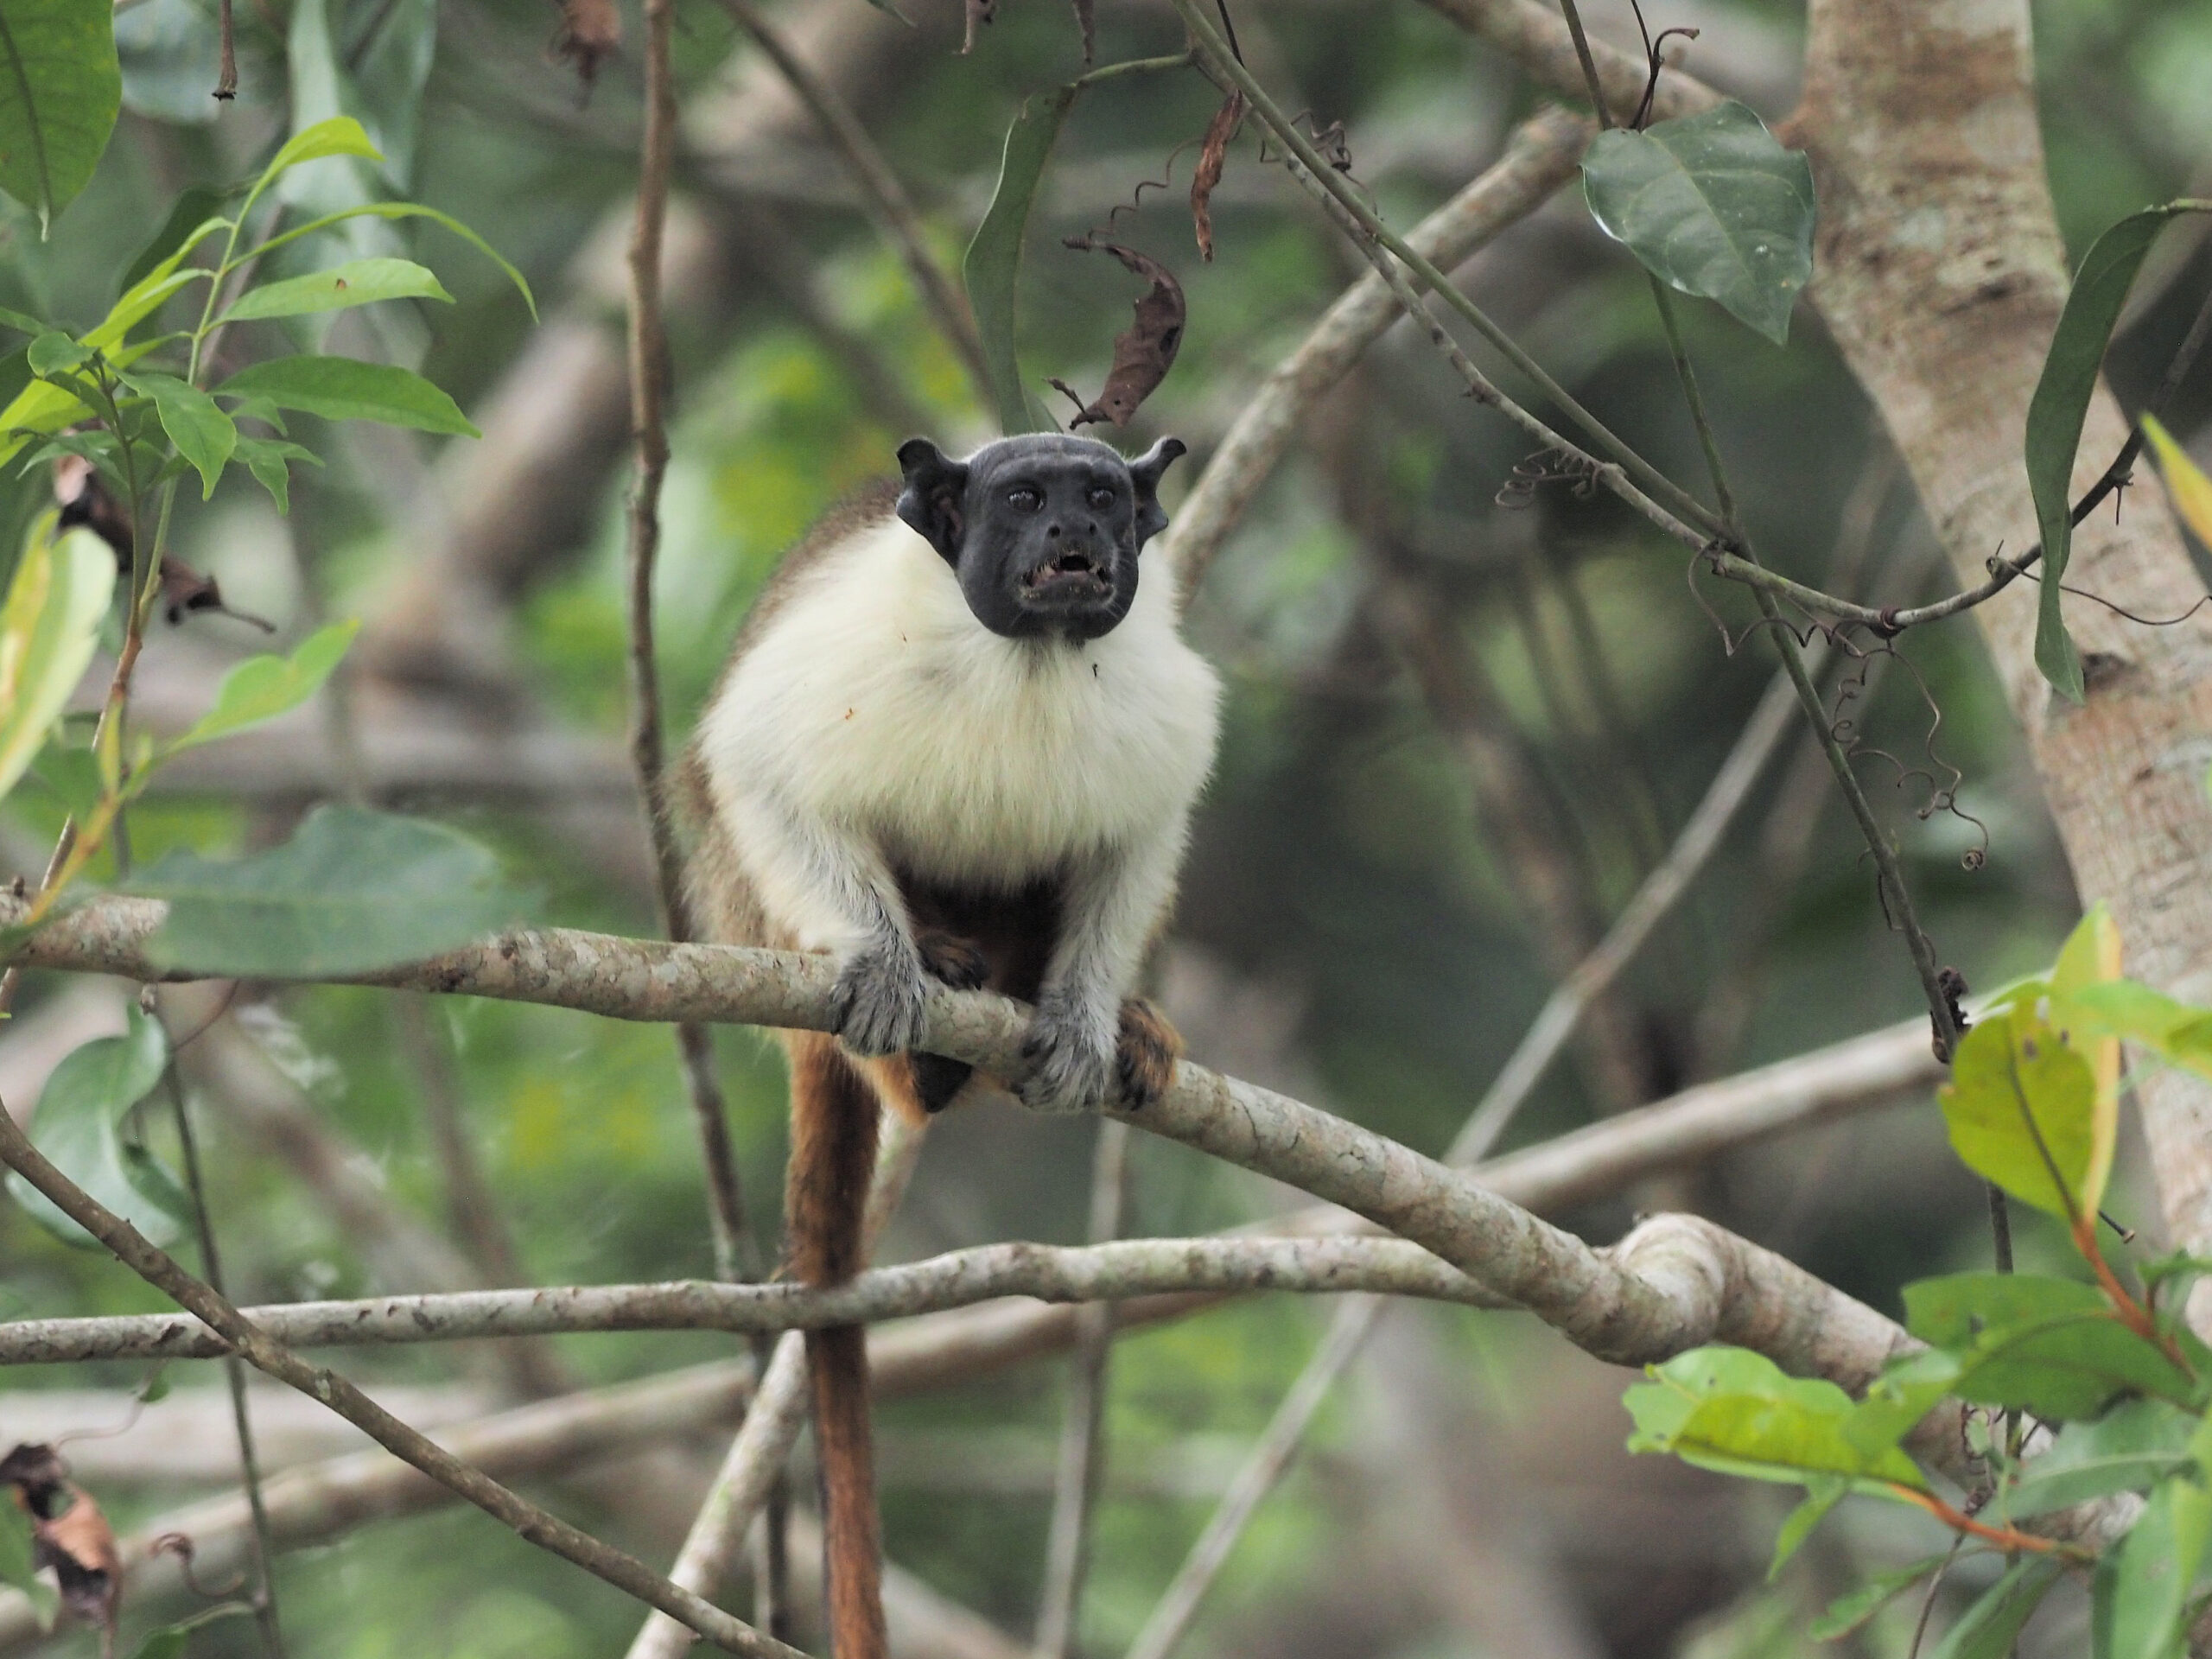 Pied Tamarin is critically endangered and only found in a comparatively small area around Manaus © Chris Collins